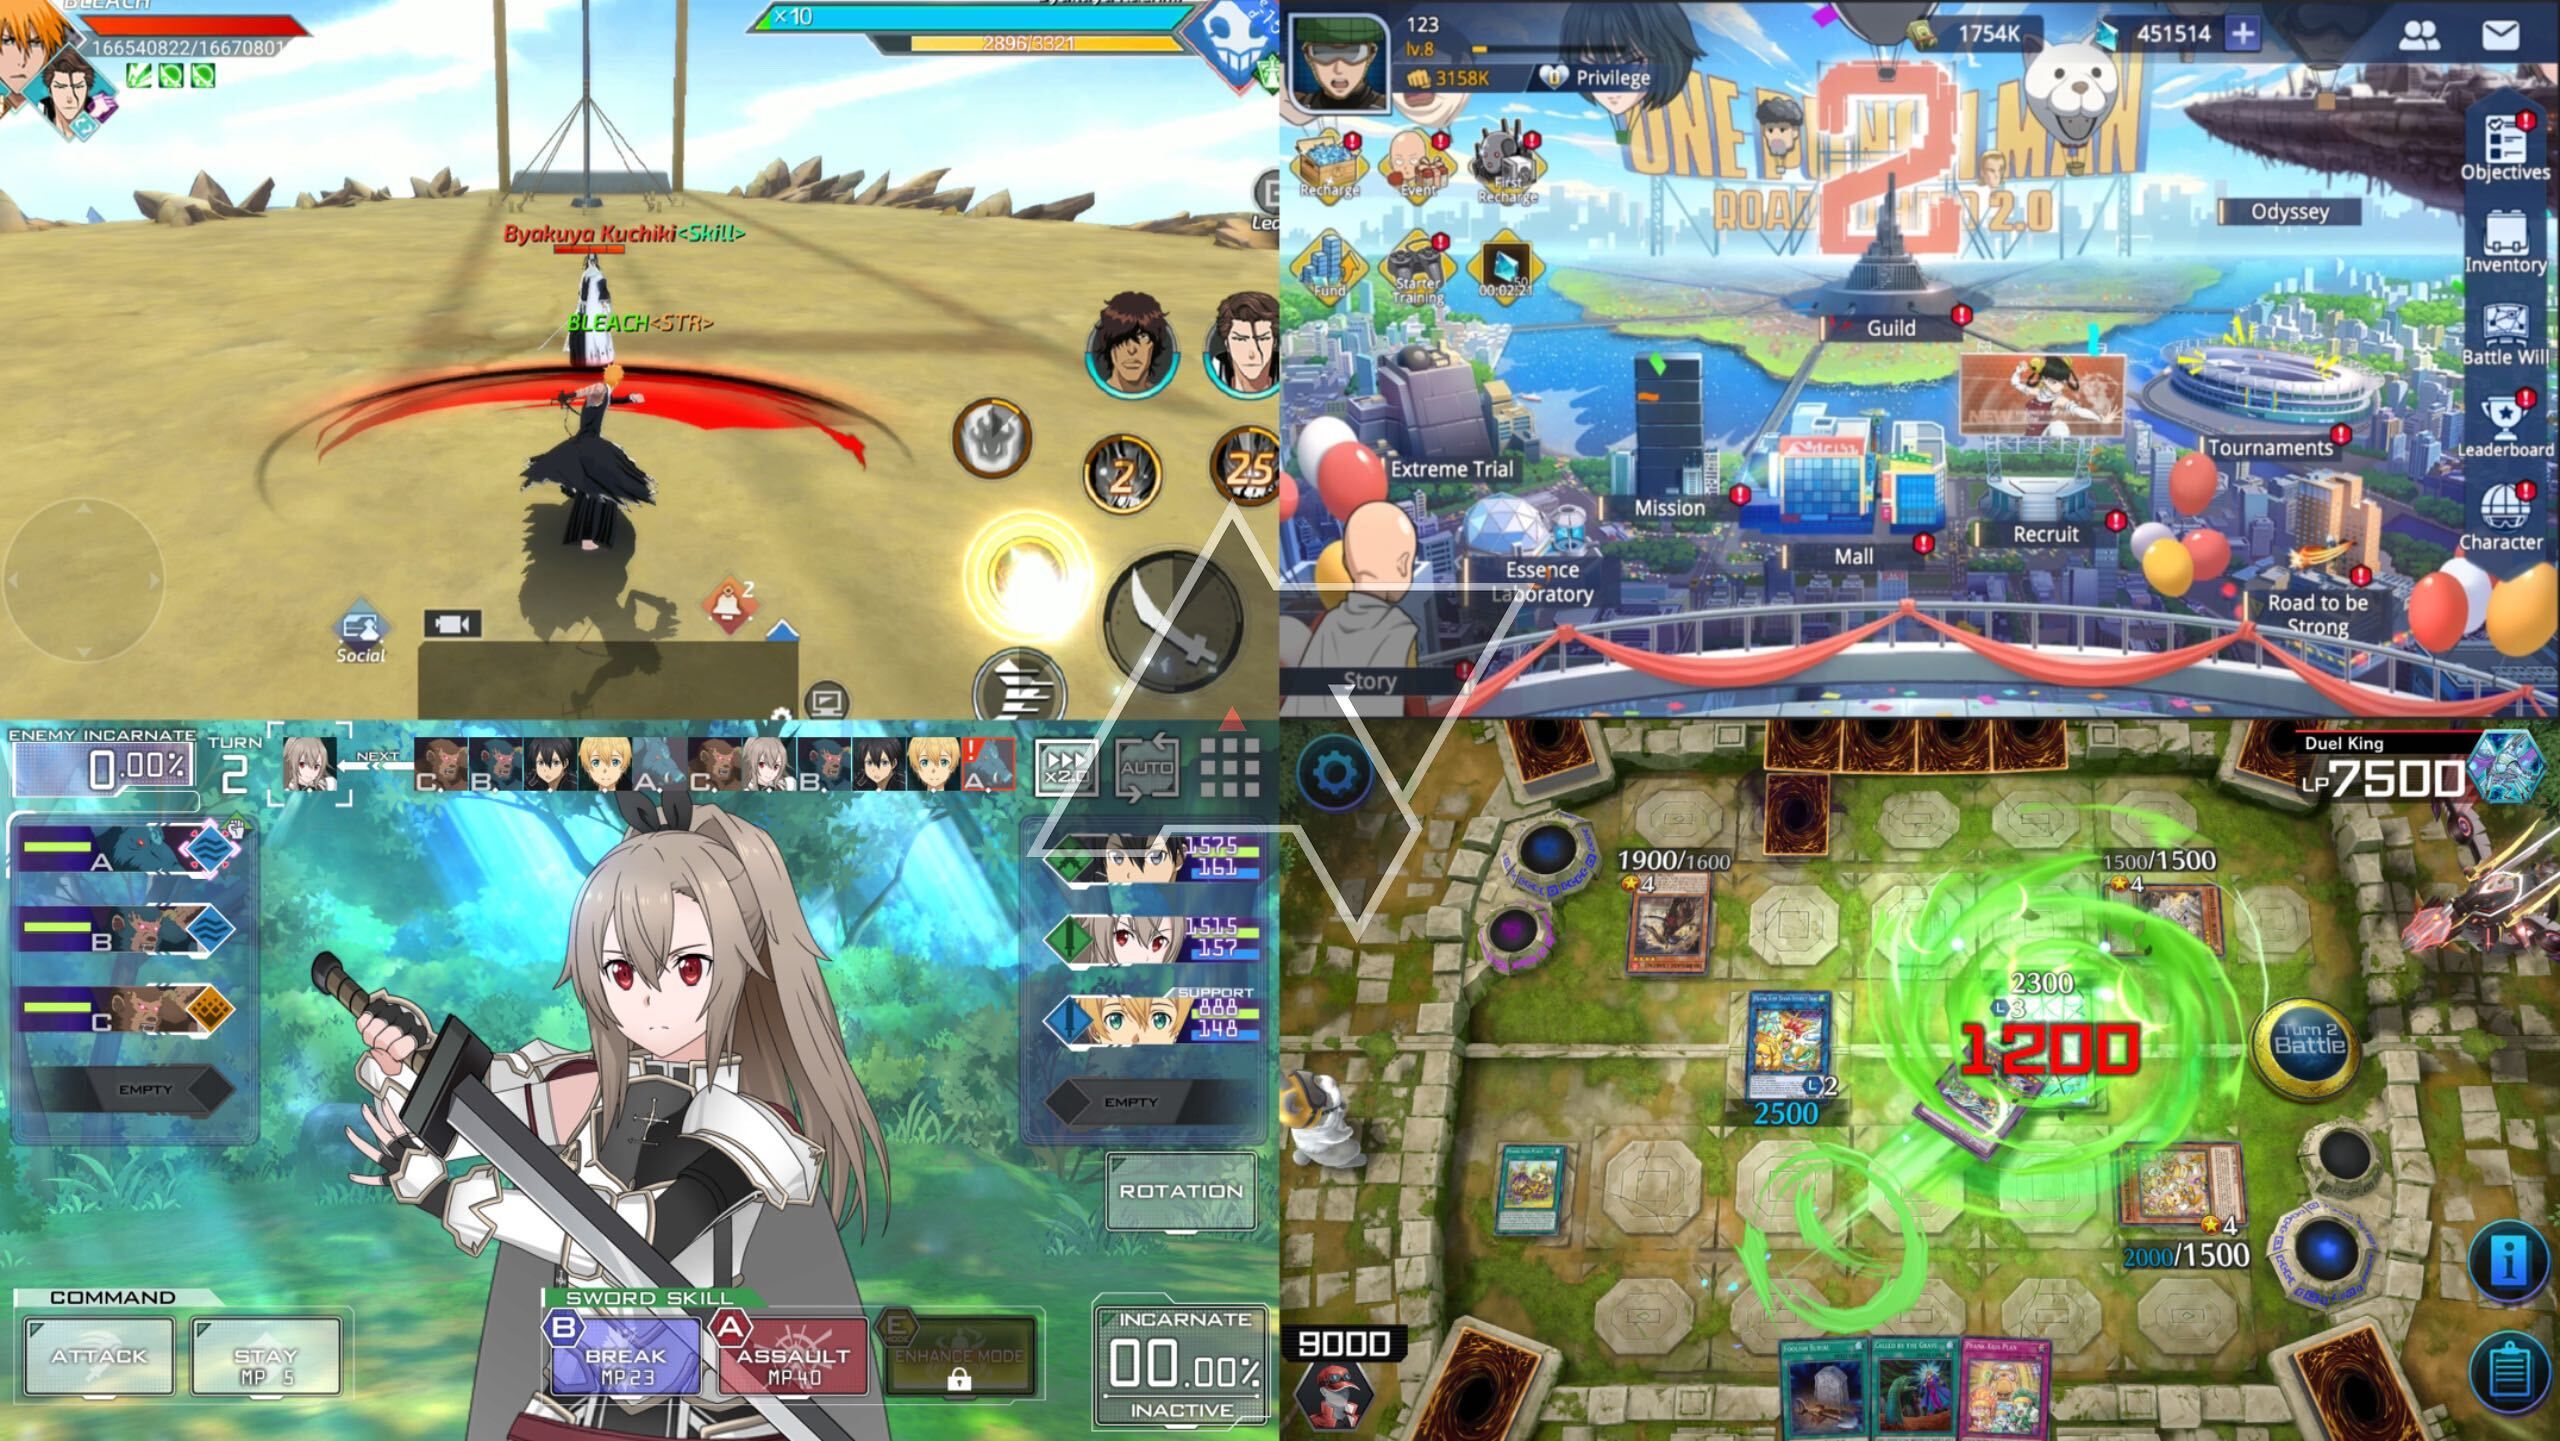 20 Upcoming Anime Games for Mobile  PC YOU NEED TO PLAY  YouTube